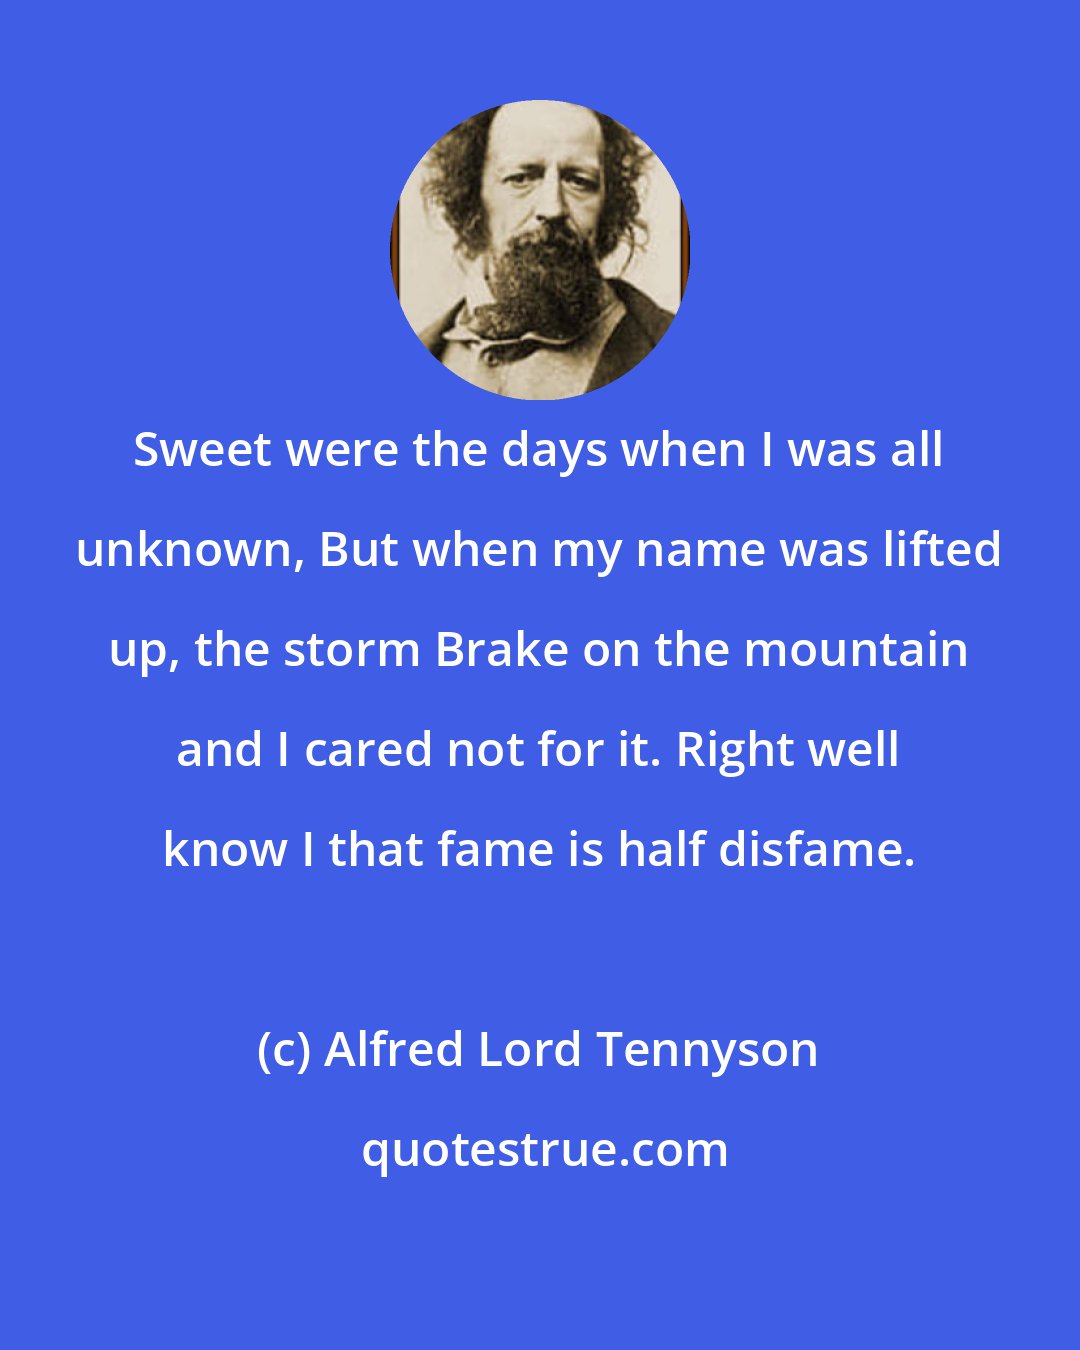 Alfred Lord Tennyson: Sweet were the days when I was all unknown, But when my name was lifted up, the storm Brake on the mountain and I cared not for it. Right well know I that fame is half disfame.